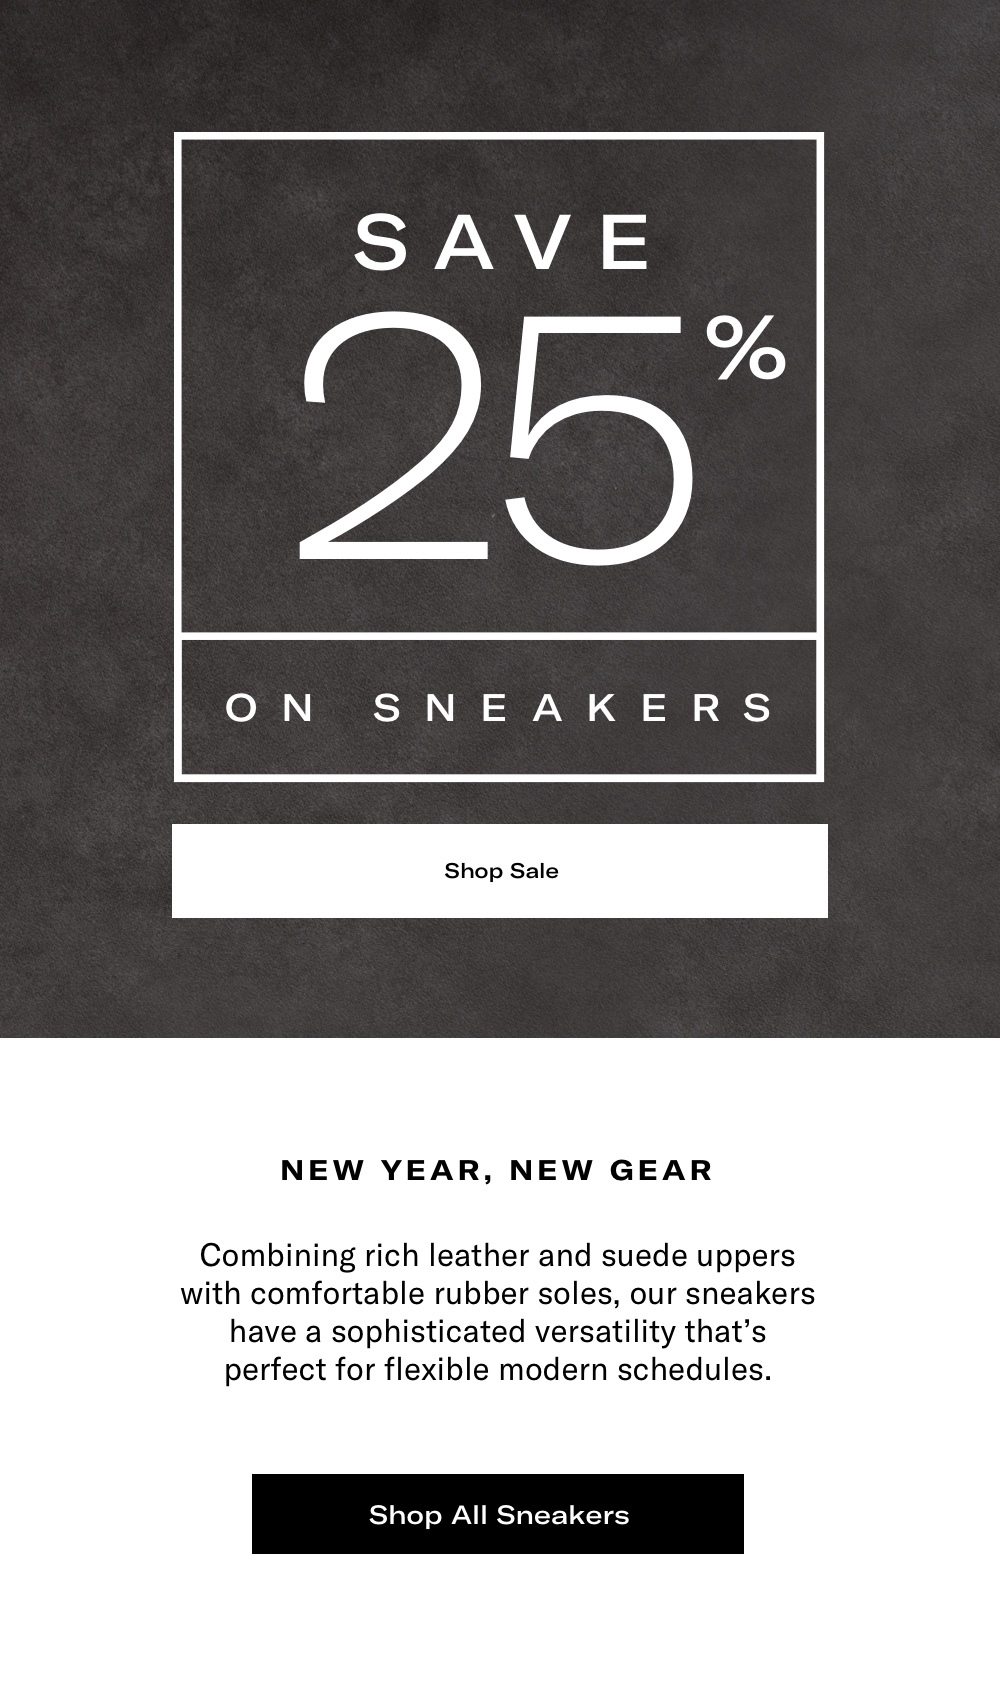 Save 25% on Sneakers